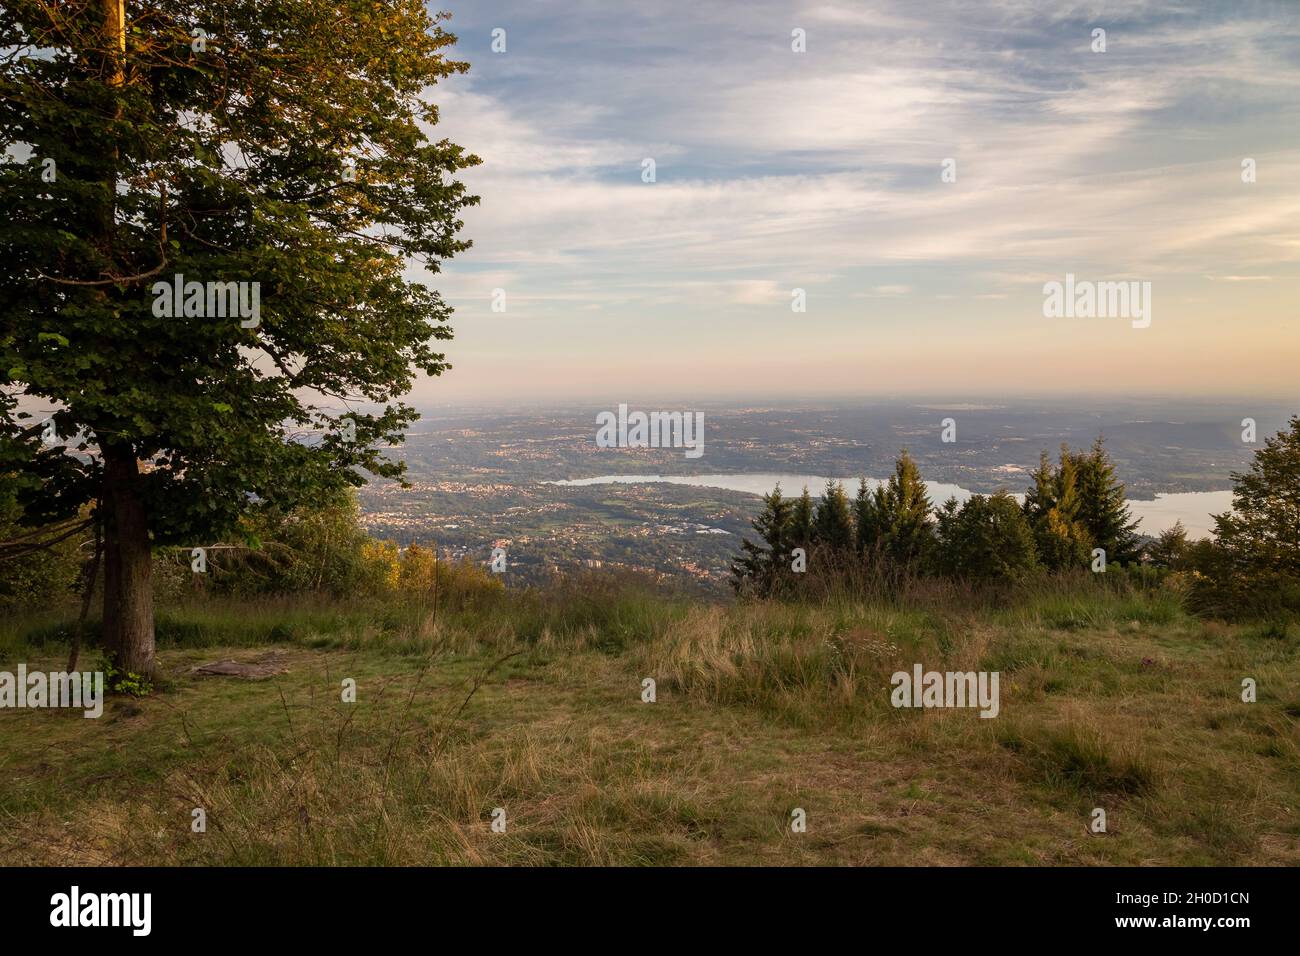 View of Varese Lake from the Punta di Mezzo viewpoint at Campo dei Fiori at sunset. Campo dei Fiori, Varese, Parco Campo dei Fiori, Lombardy, Italy. Stock Photo